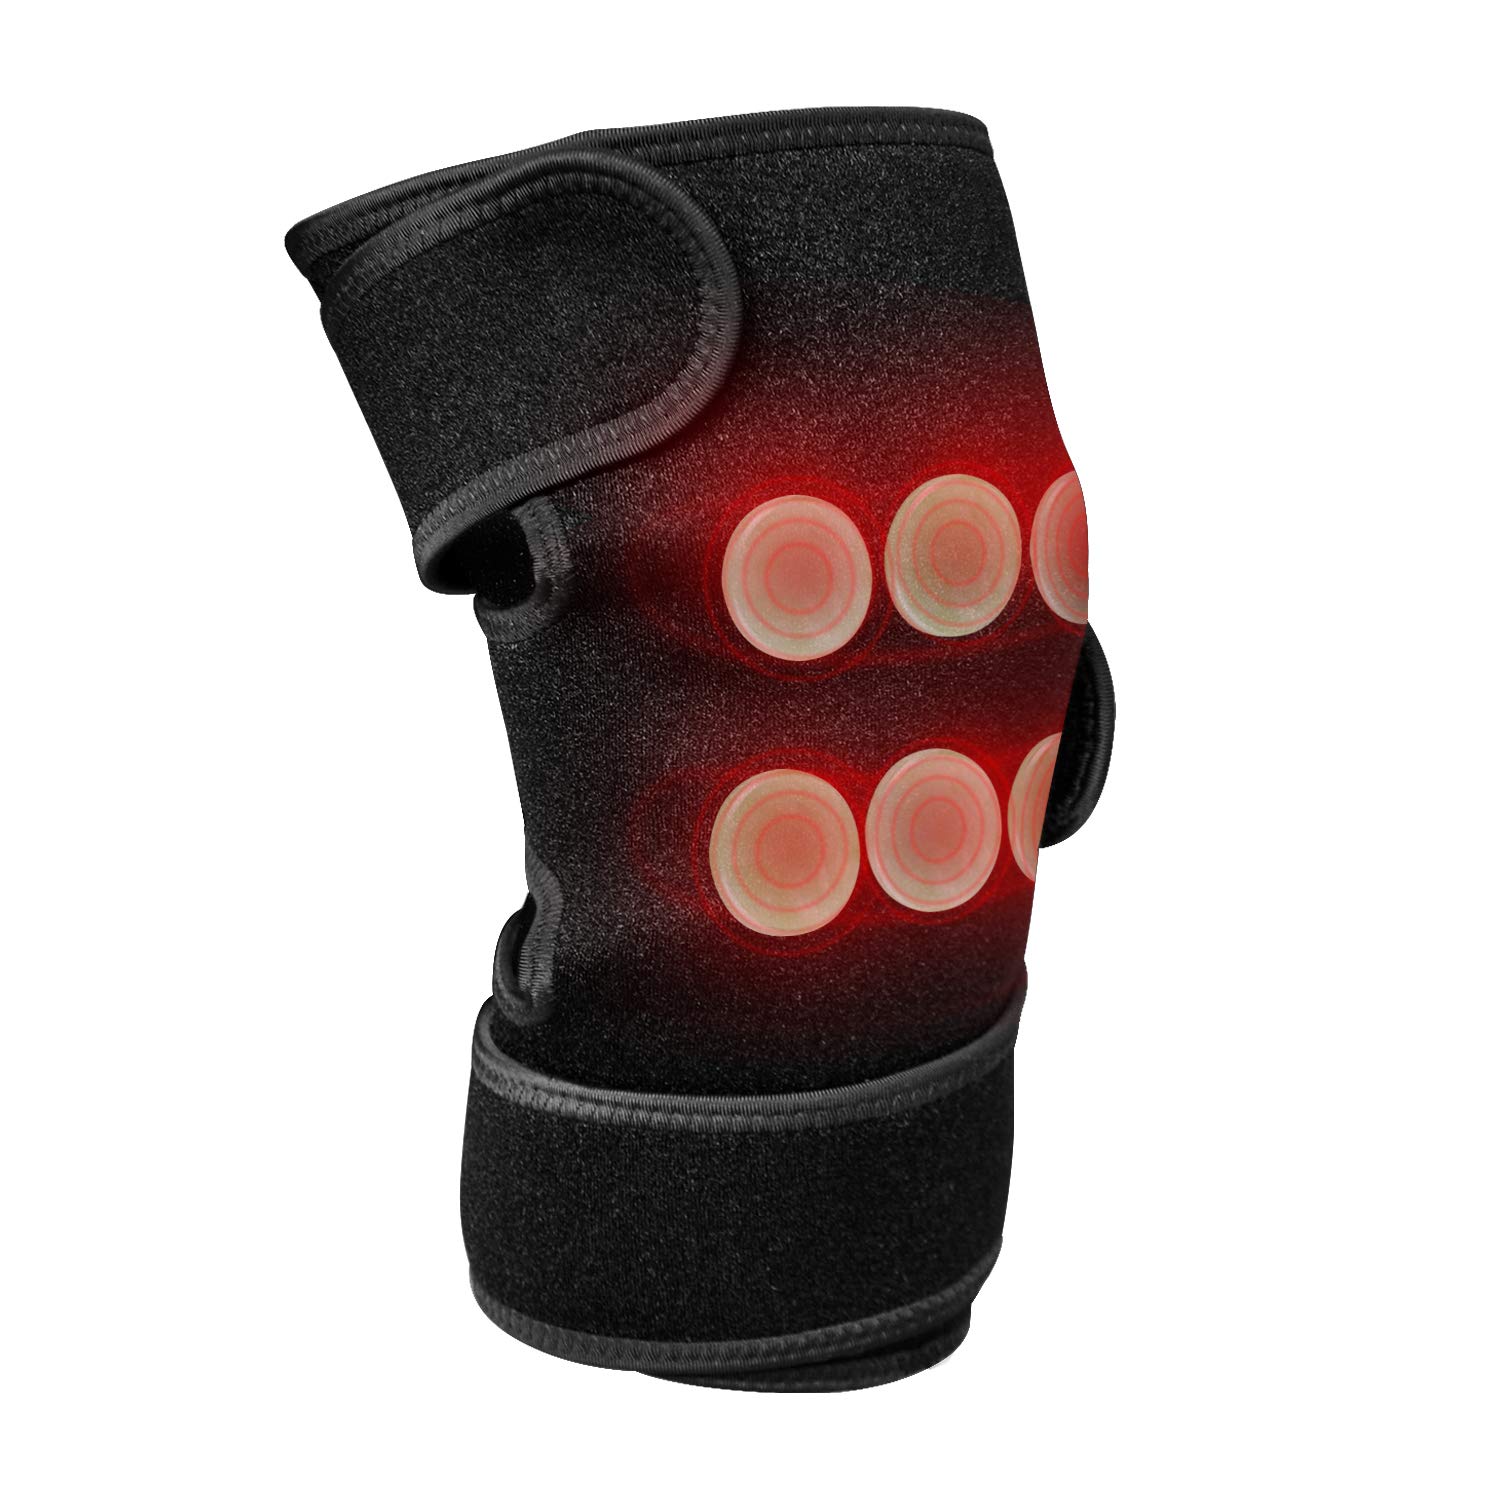 UTK Heated Knee Brace Wrap for Pain Relief Far Infrared Heating